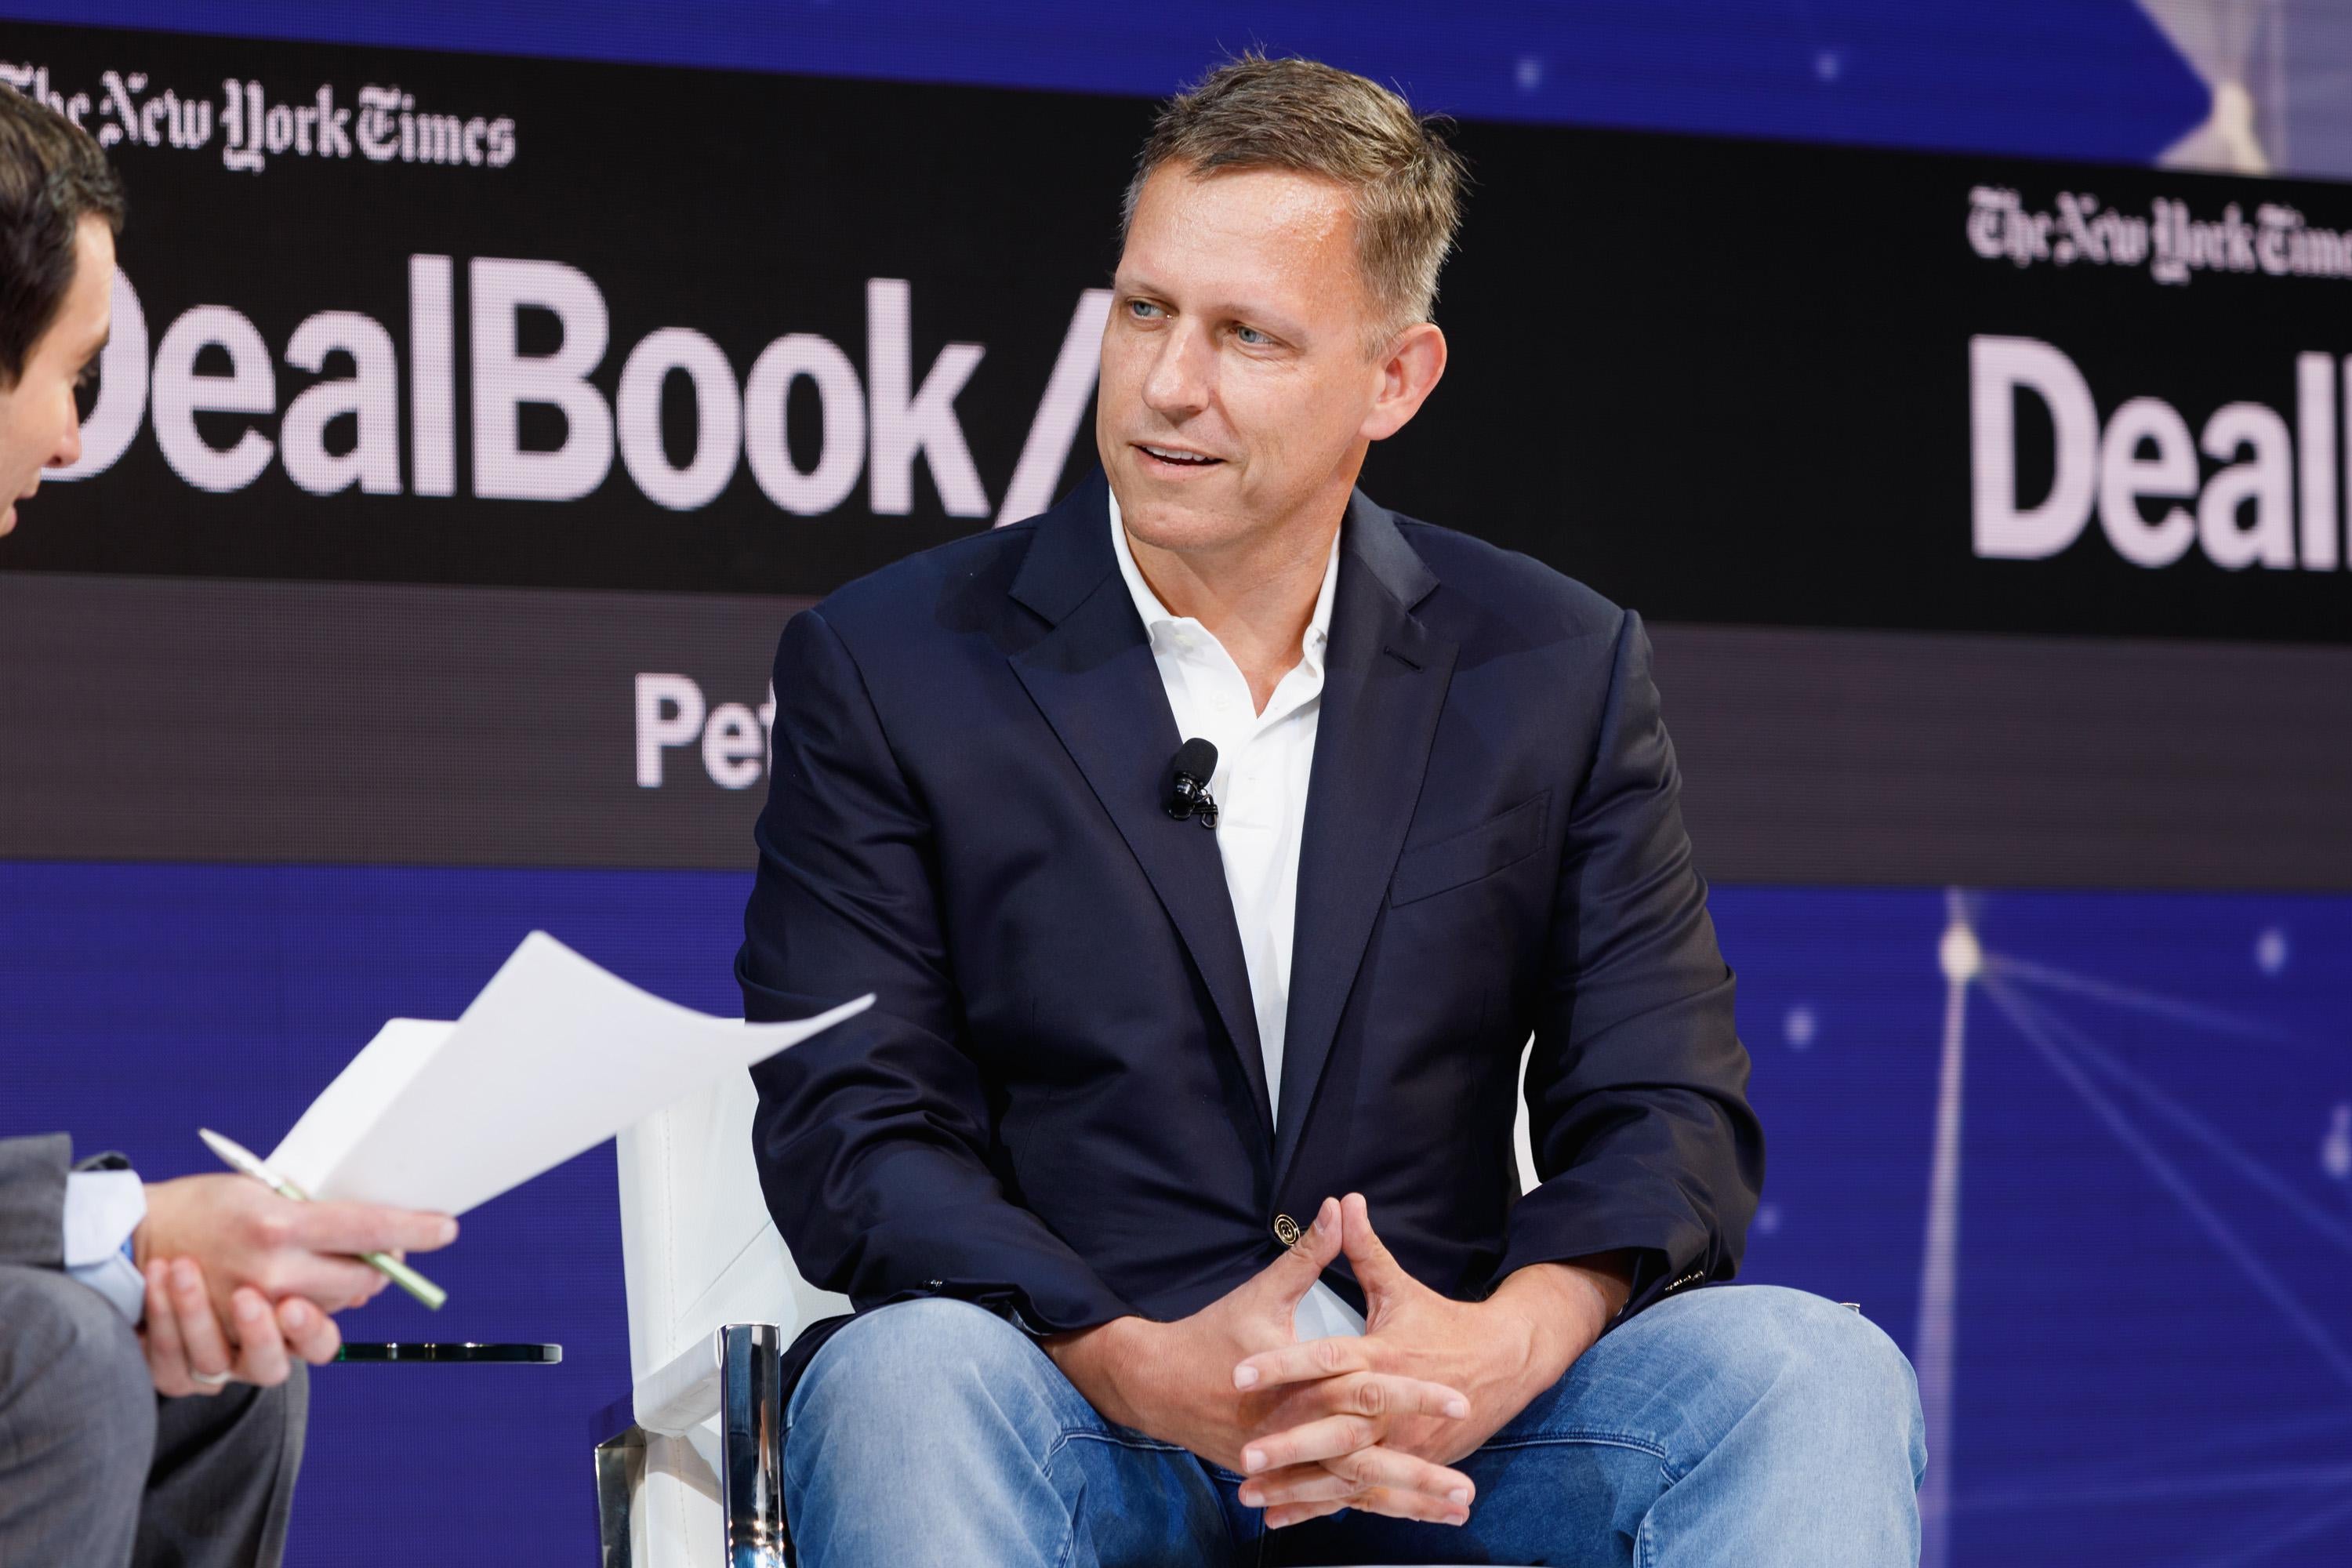 NEW YORK, NY - NOVEMBER 01:  Peter Thiel, Partner, Founders Fund speaks onstage during the 2018 New York Times Dealbook on November 1, 2018 in New York City.  (Photo by Michael Cohen/Getty Images for The New York Times)